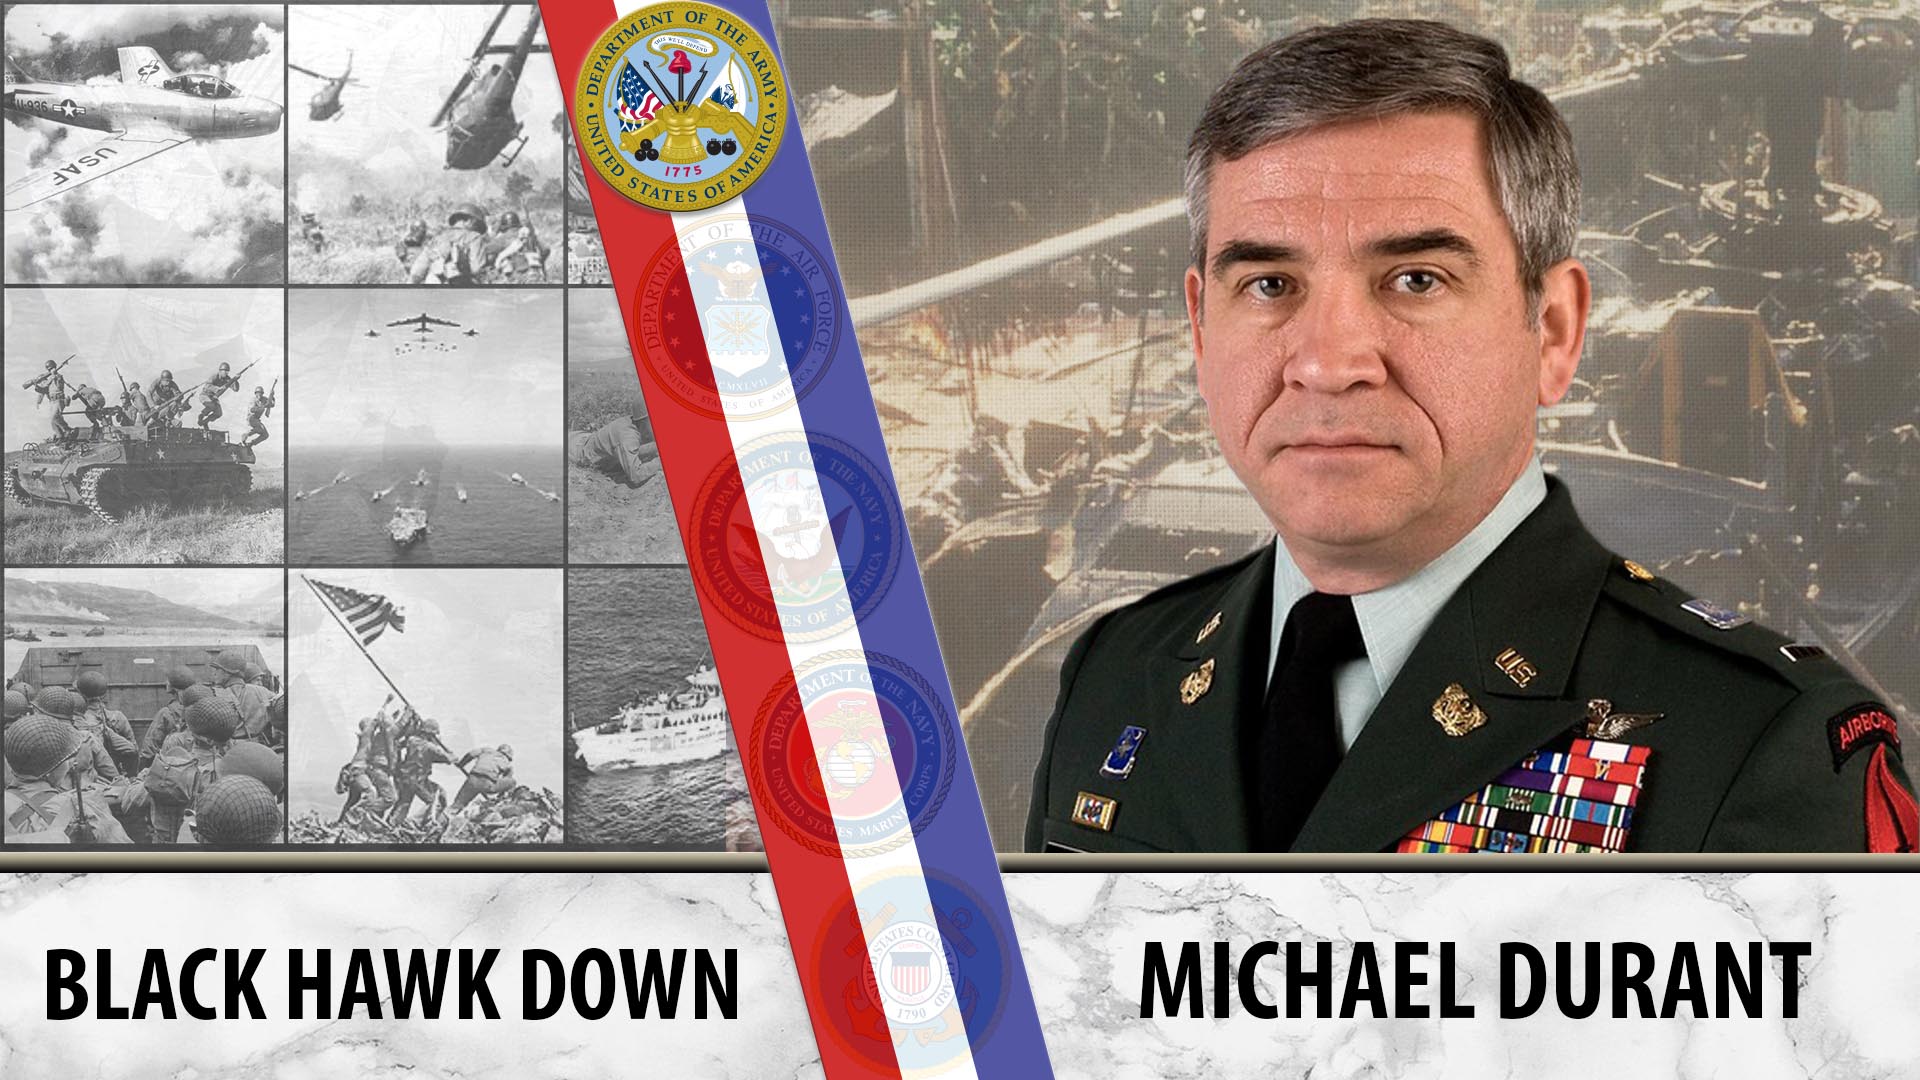 Army Veteran and pilot Michael Durant survived the Battle of Mogadishu.